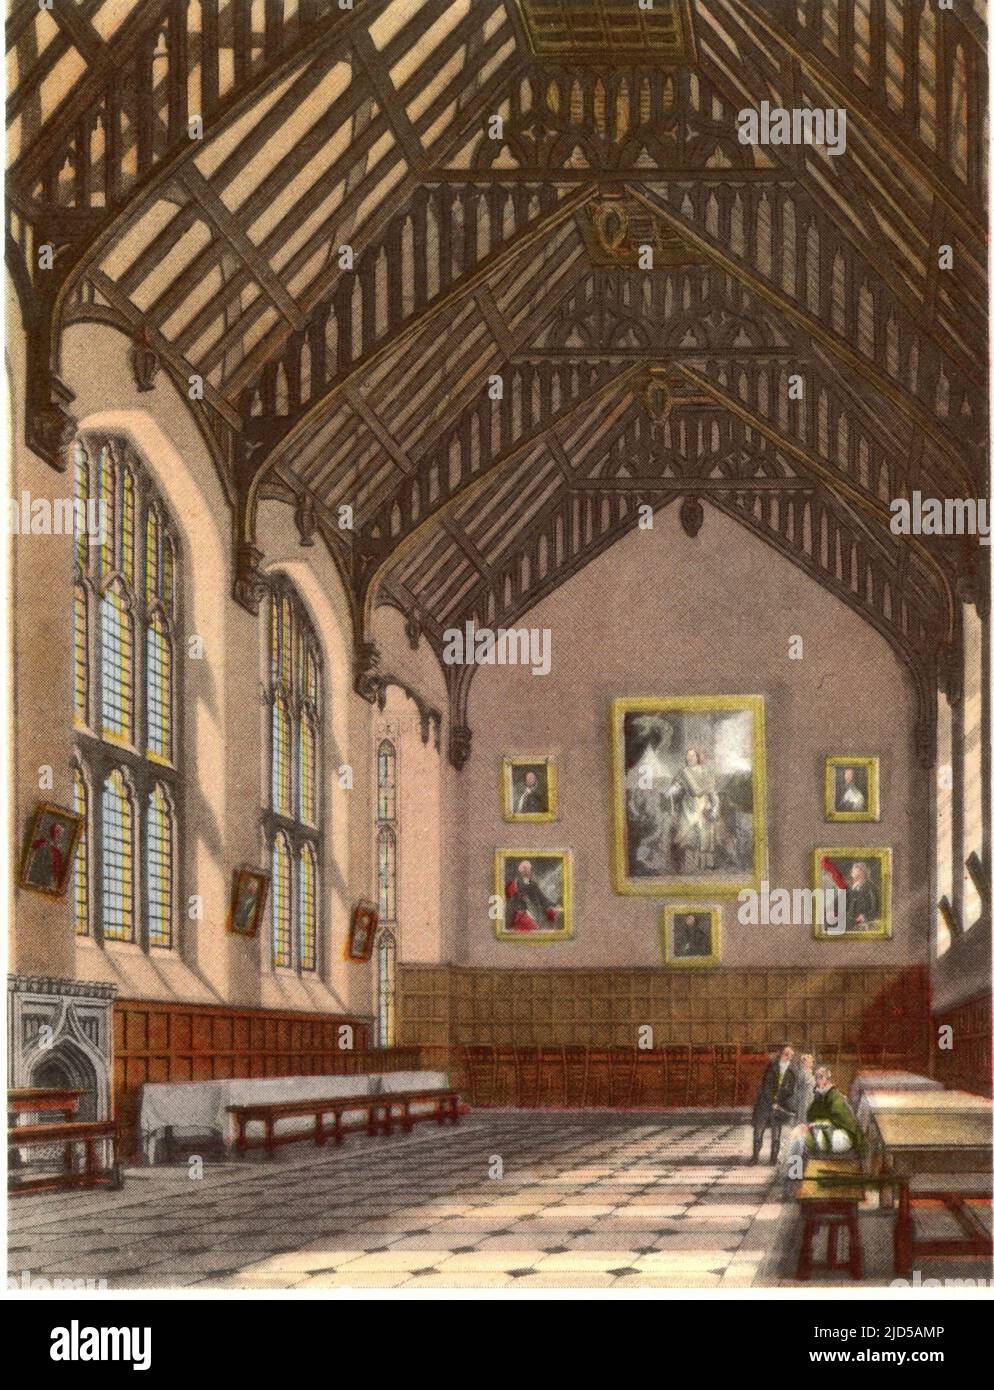 Exeter College Hall, 1814. After Augustus Charles Pugin (1762-1832). Exeter College is one of the constituent colleges of the University of Oxford in Oxford, England. It was founded in 1314 by Walter de Stapledon (1261-1326), Bishop of Exeter. The hall, constructed in 1618, is notable for its vaulted ceilings and numerous portraits. A print from 'A History of the University of Oxford, its Colleges, Halls, and Public Buildings', published by Rudolph Ackermann, 1814. Ilustrated by Augustus Pugin, F. Mackenzie and others. Stock Photo